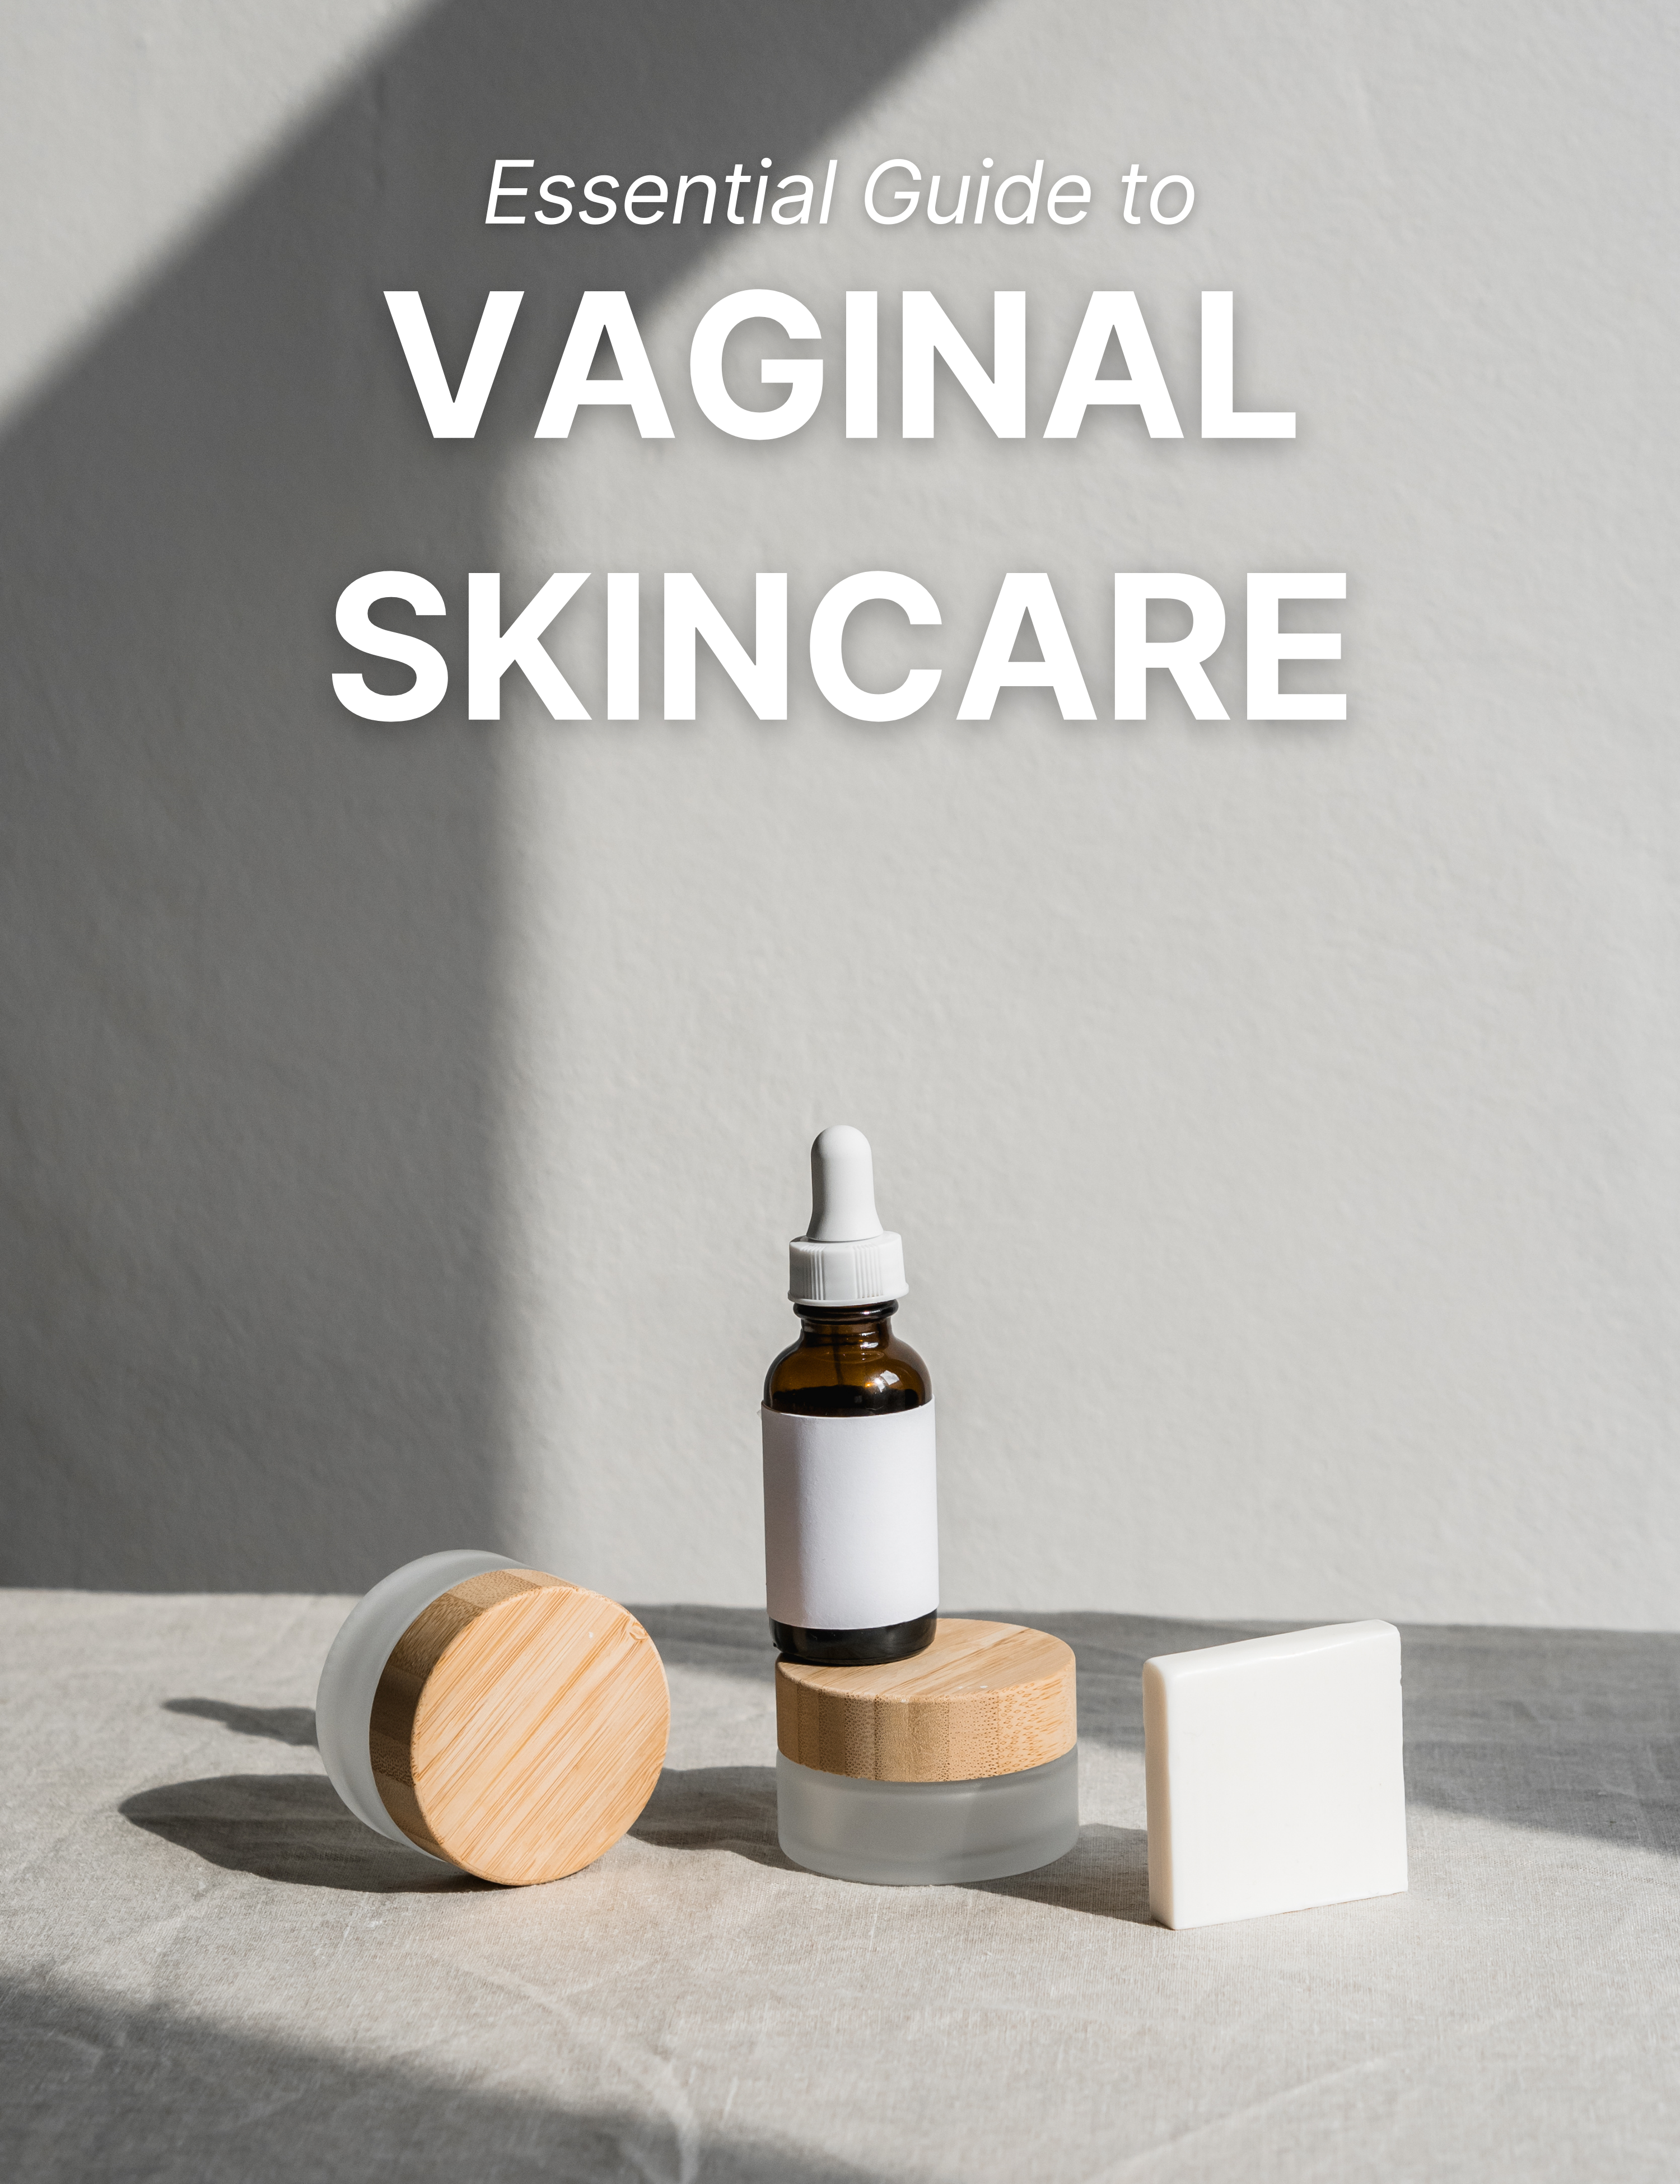 The Essential Guide to Vaginal Skin Care: Tips for Maintaining Balance and Comfort